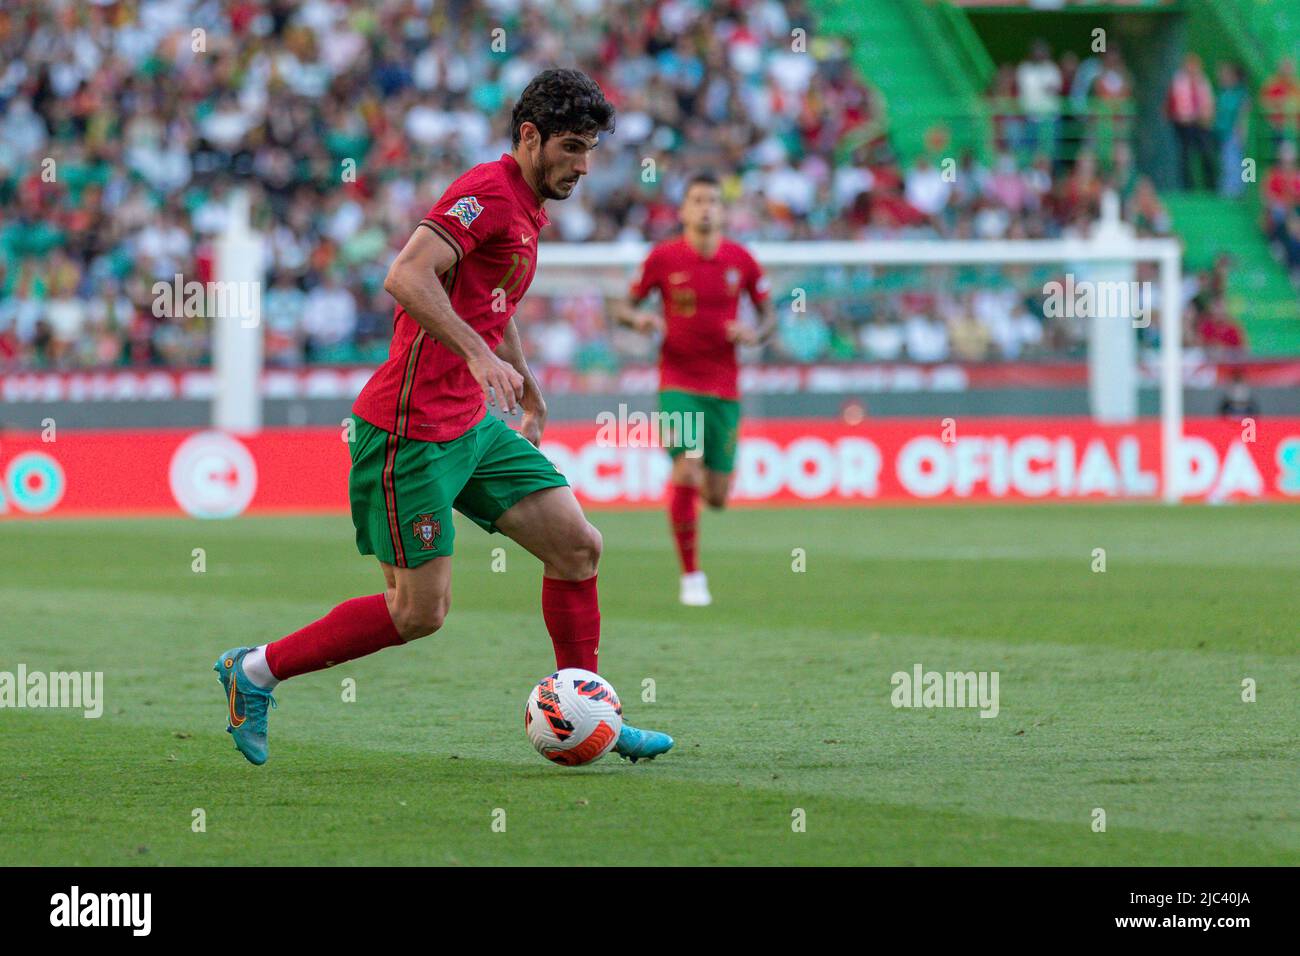 June 09, 2022. Lisbon, Portugal. Portugal's and Valencia midfielder Goncalo Guedes (17) in action during the UEFA Nations League Final Tournament between Portugal and Czechia Credit: Alexandre de Sousa/Alamy Live News Stock Photo